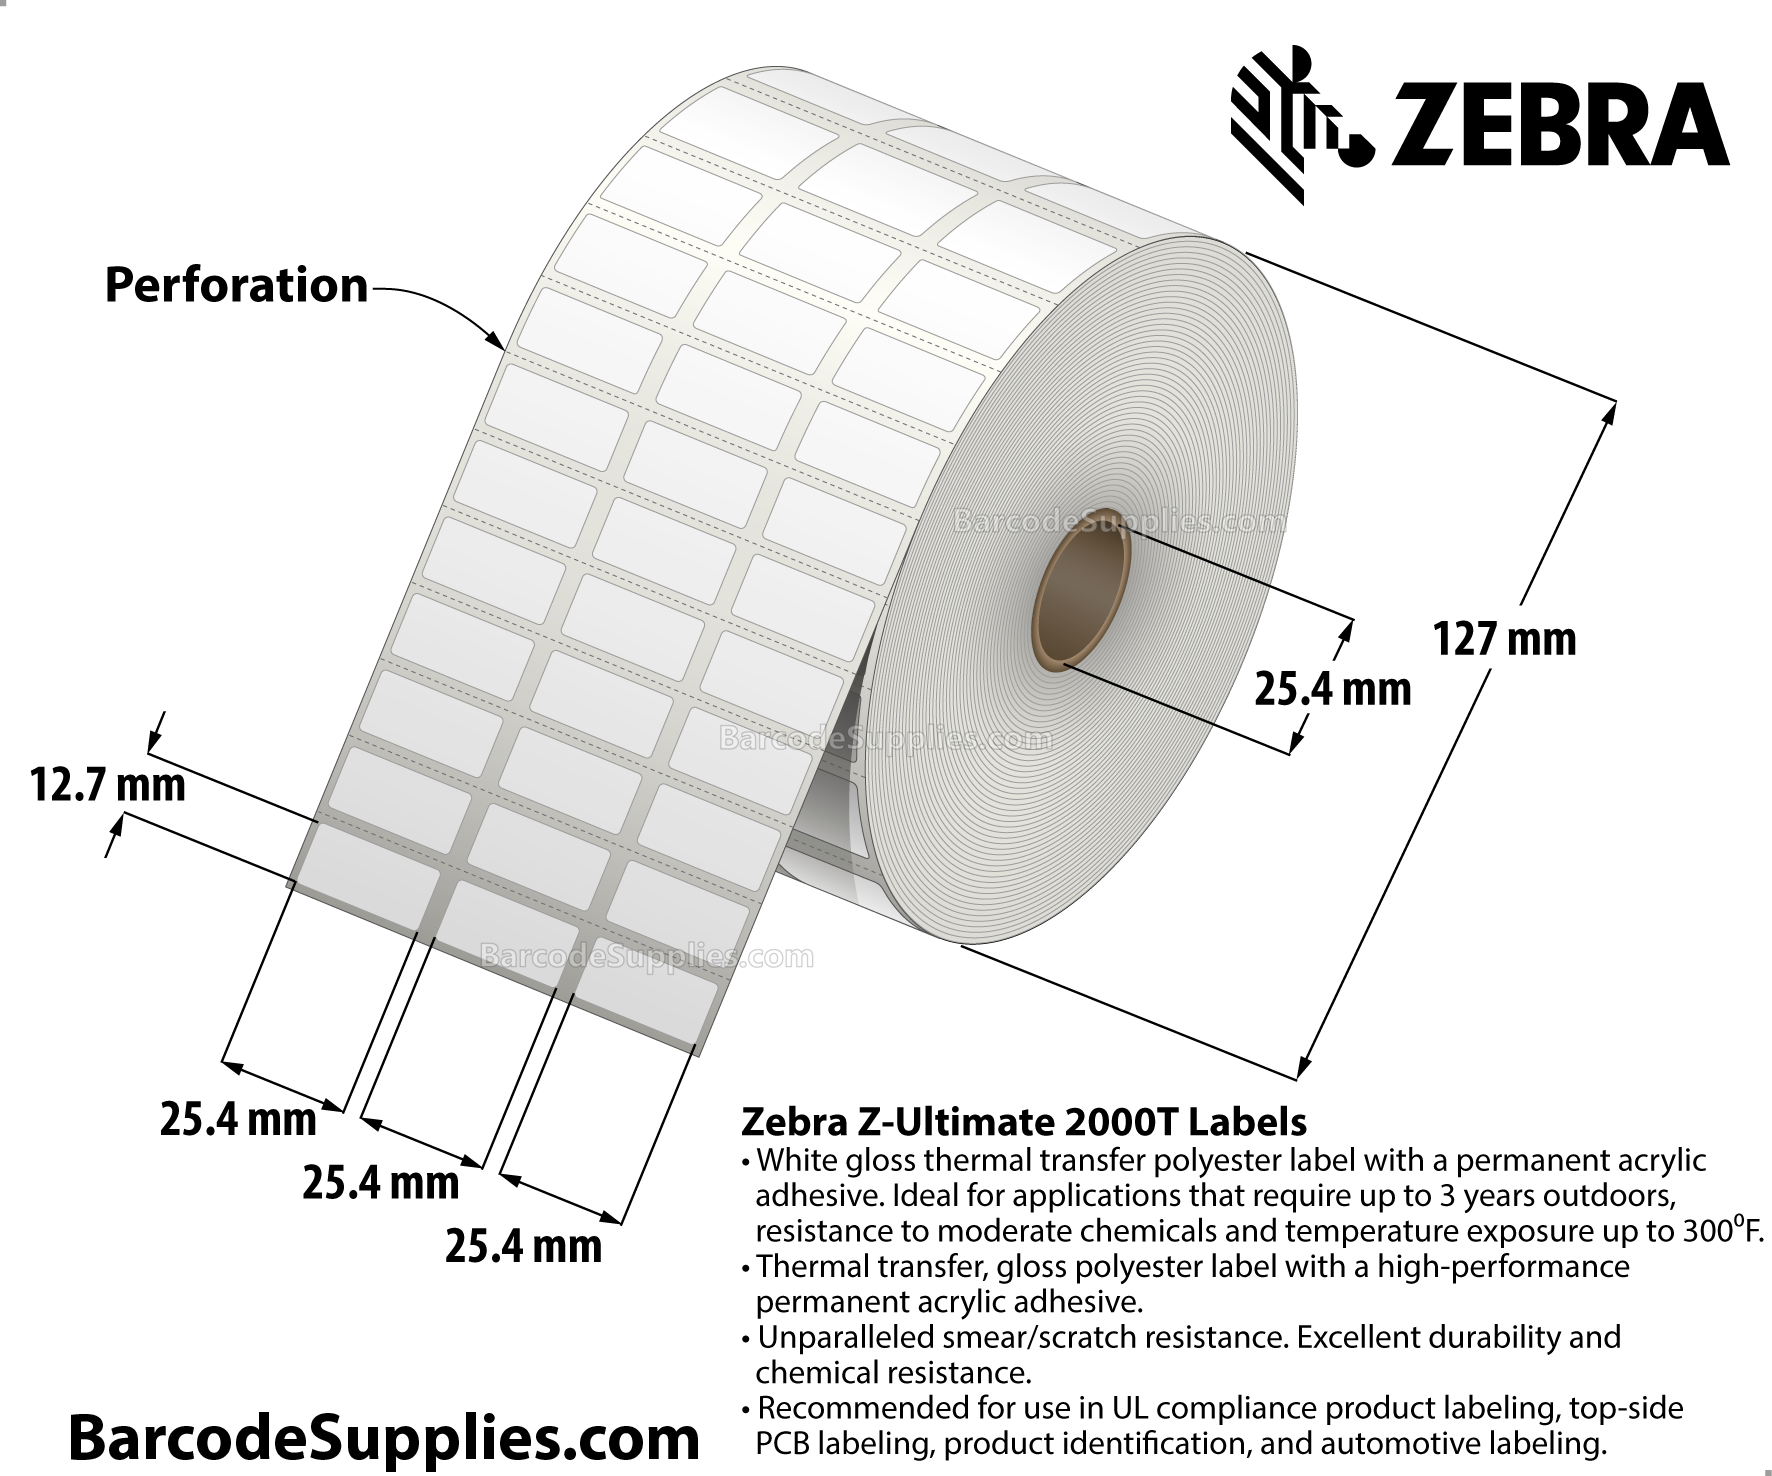 1 x 0.5 Thermal Transfer White Z-Ultimate 2000T (3-Across) Labels With Permanent Adhesive - Perforated - 5001 Labels Per Roll - Carton Of 1 Rolls - 5001 Labels Total - MPN: 10022982